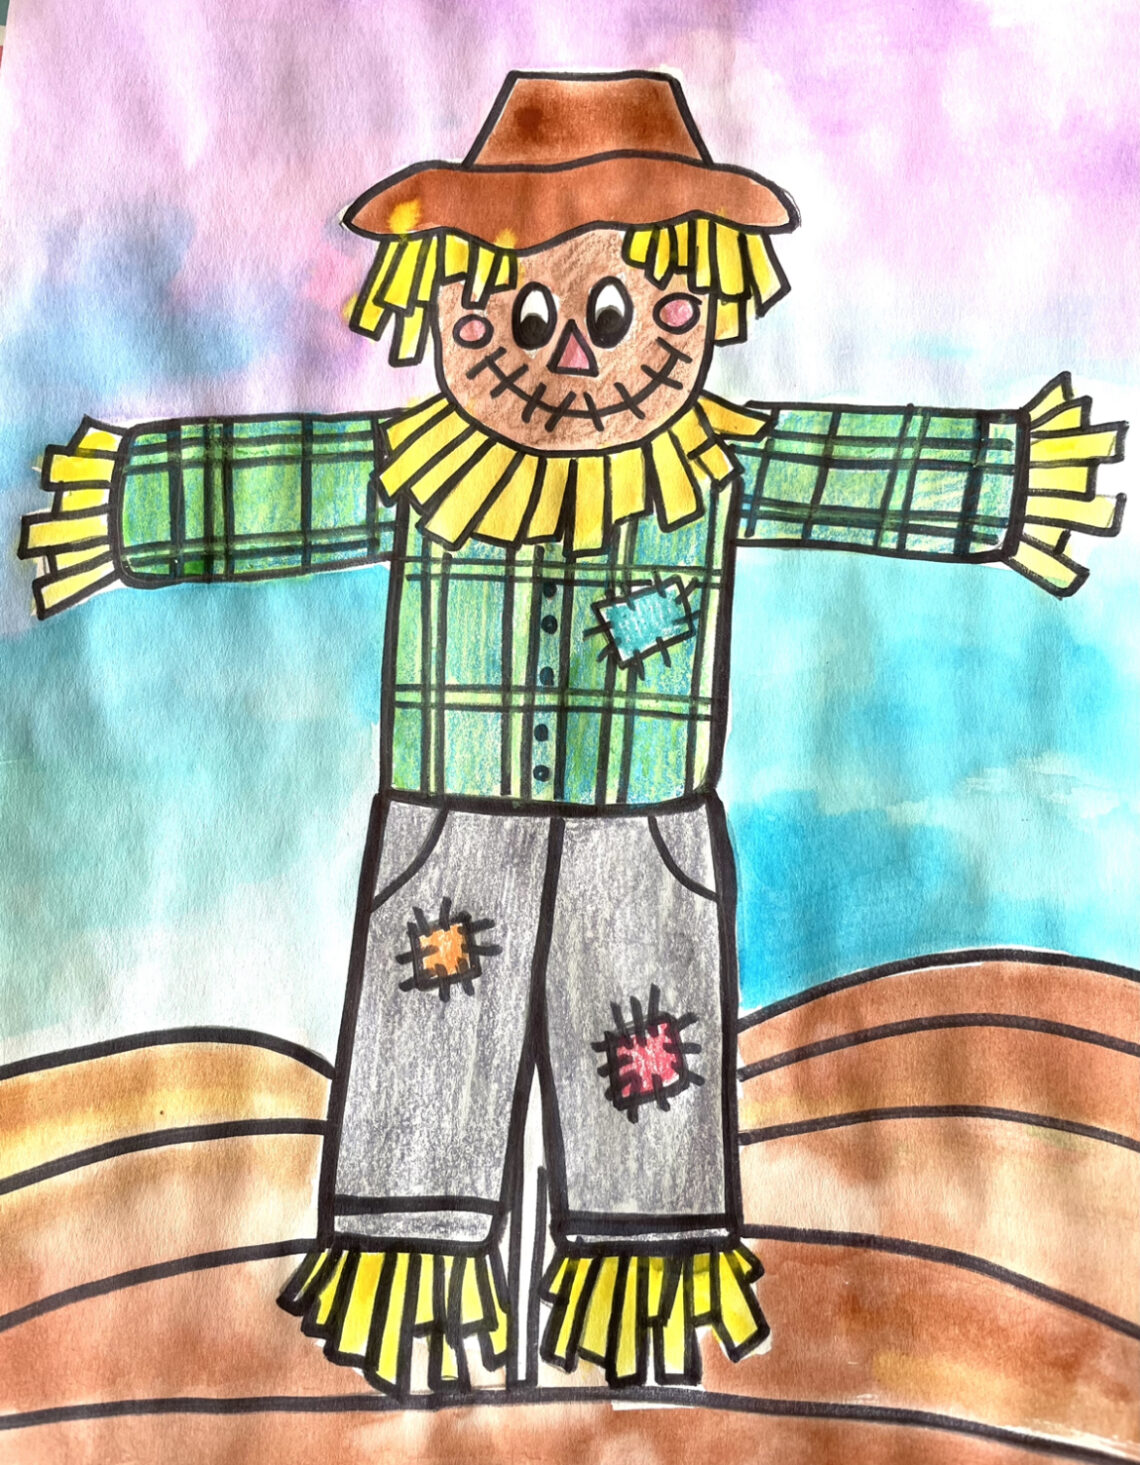 The Scarecrow – Painted Paper Art